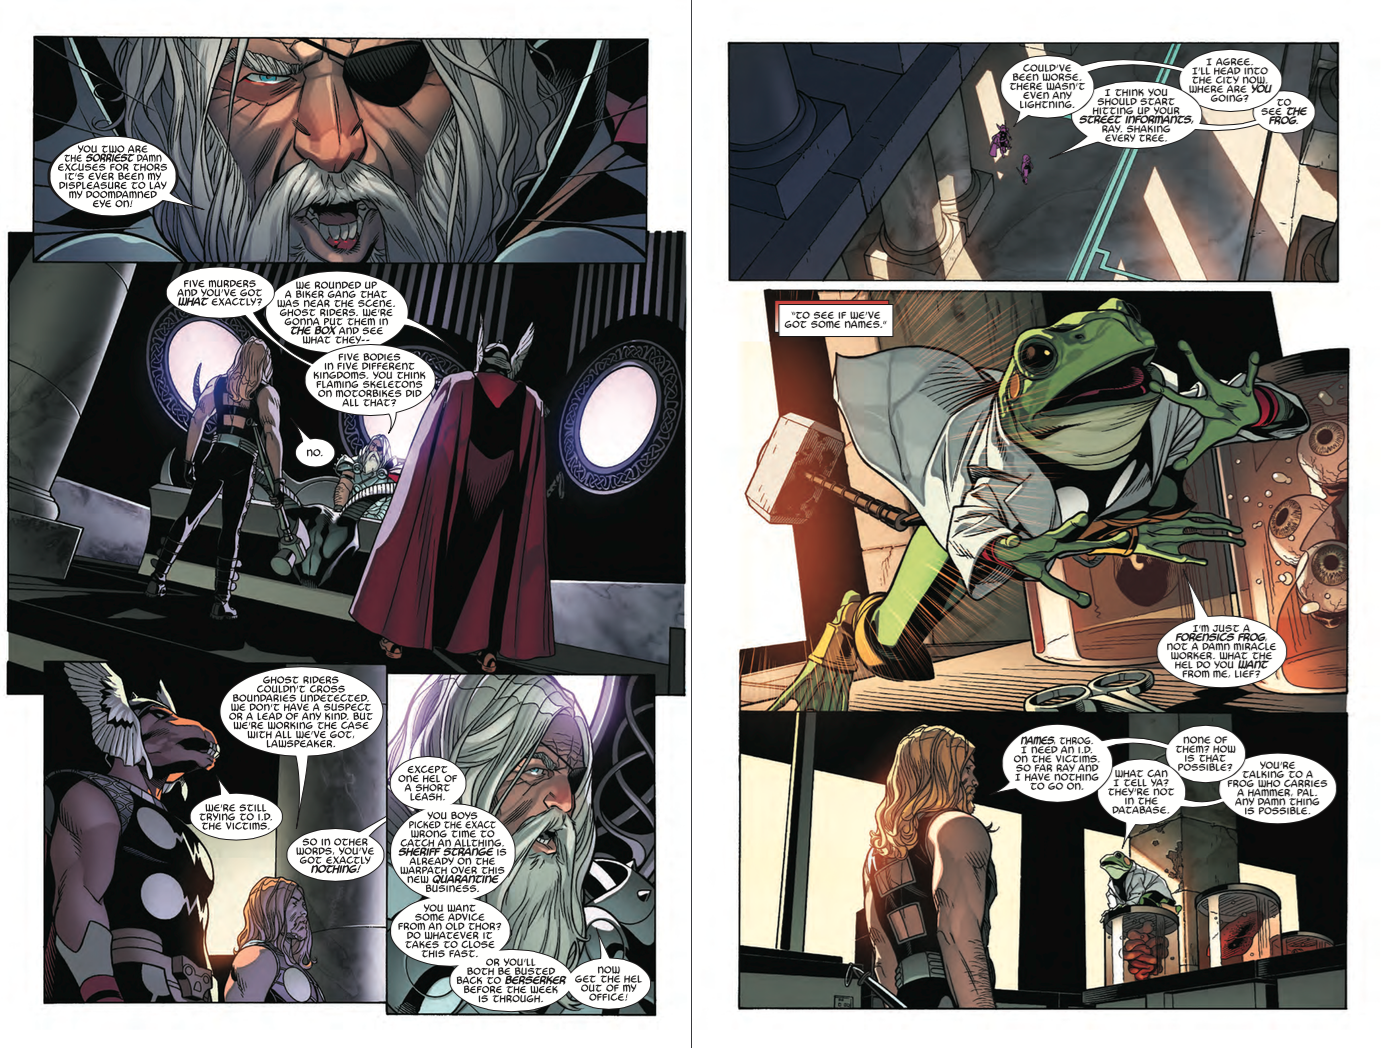 Marvel Comics Has Turned Thor Into The Wire, And It’s Awesome